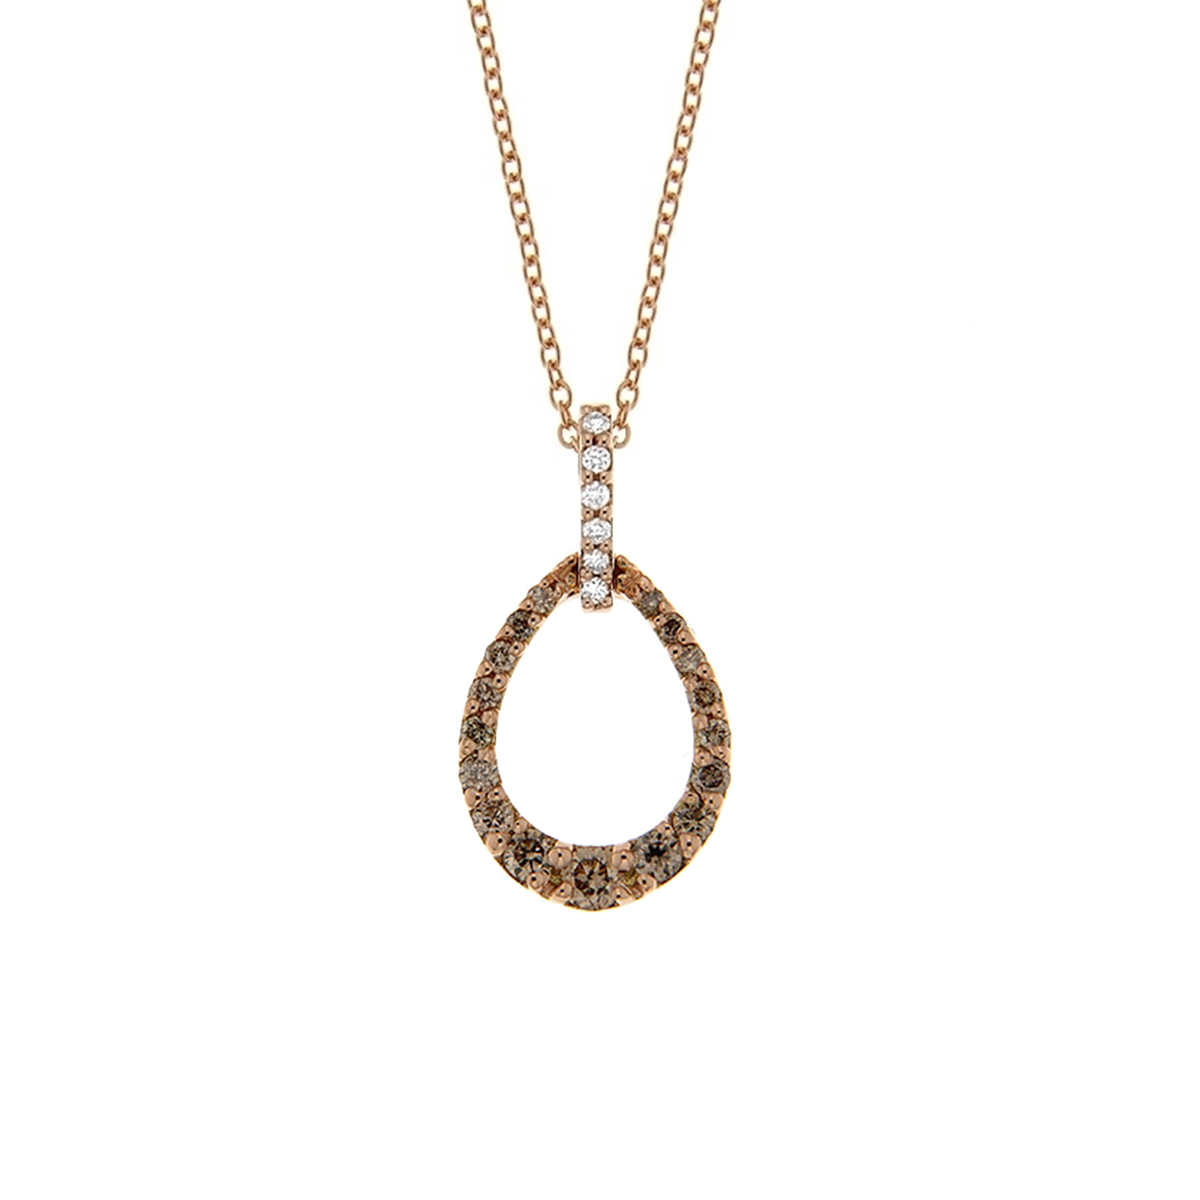 Small Drop Pendant in 18 kt rose gold with white and brown diamonds